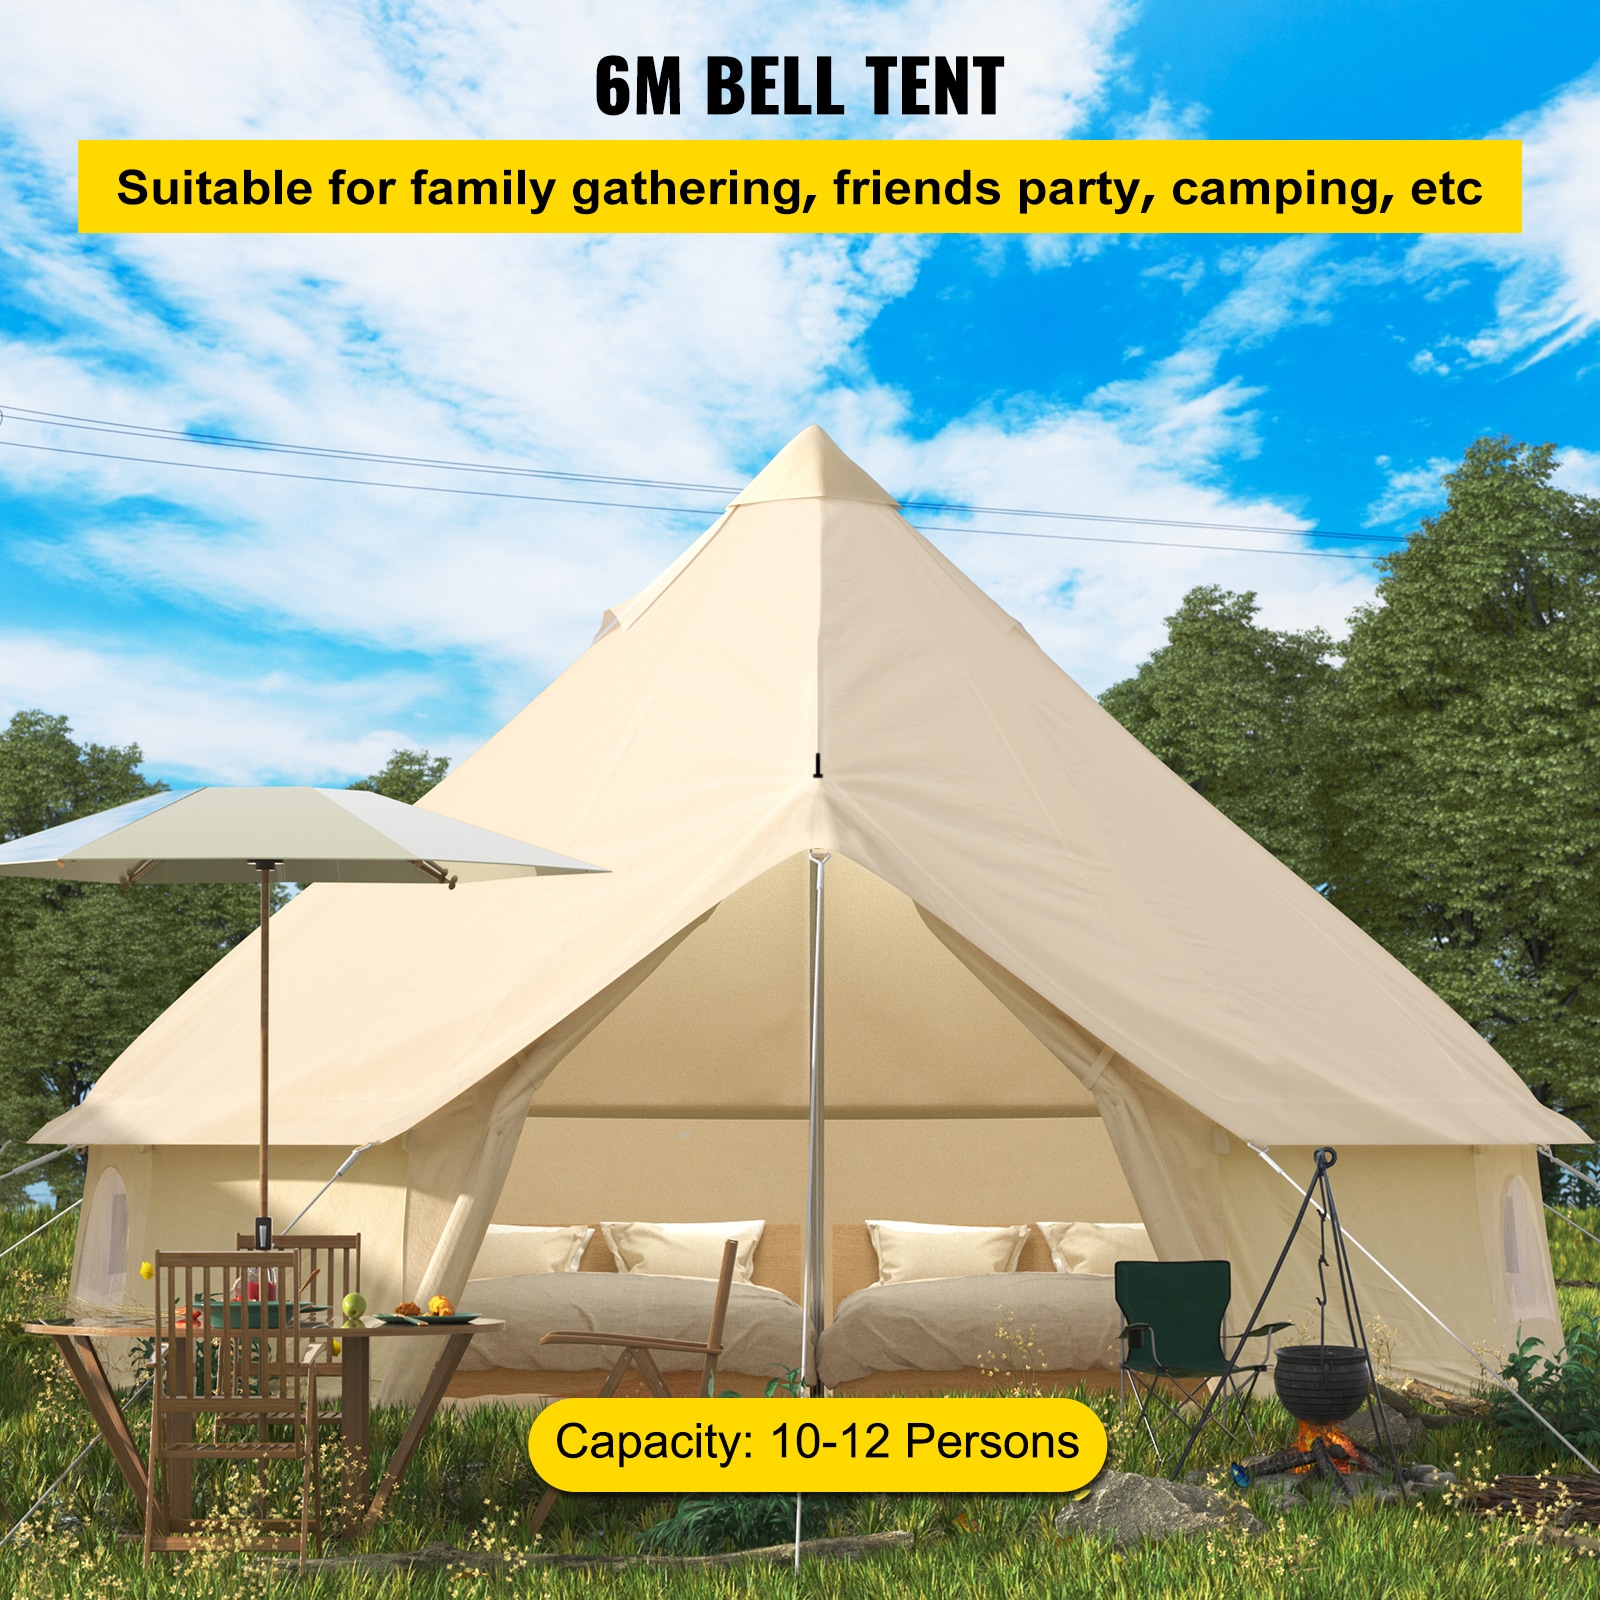 Glamping Inflatable Tent - Camping Tents for Family - Hiking and  Backpacking - Suitable for 4-5 Person Camping - Quick with 3 Minute Setup -  7.8FT x